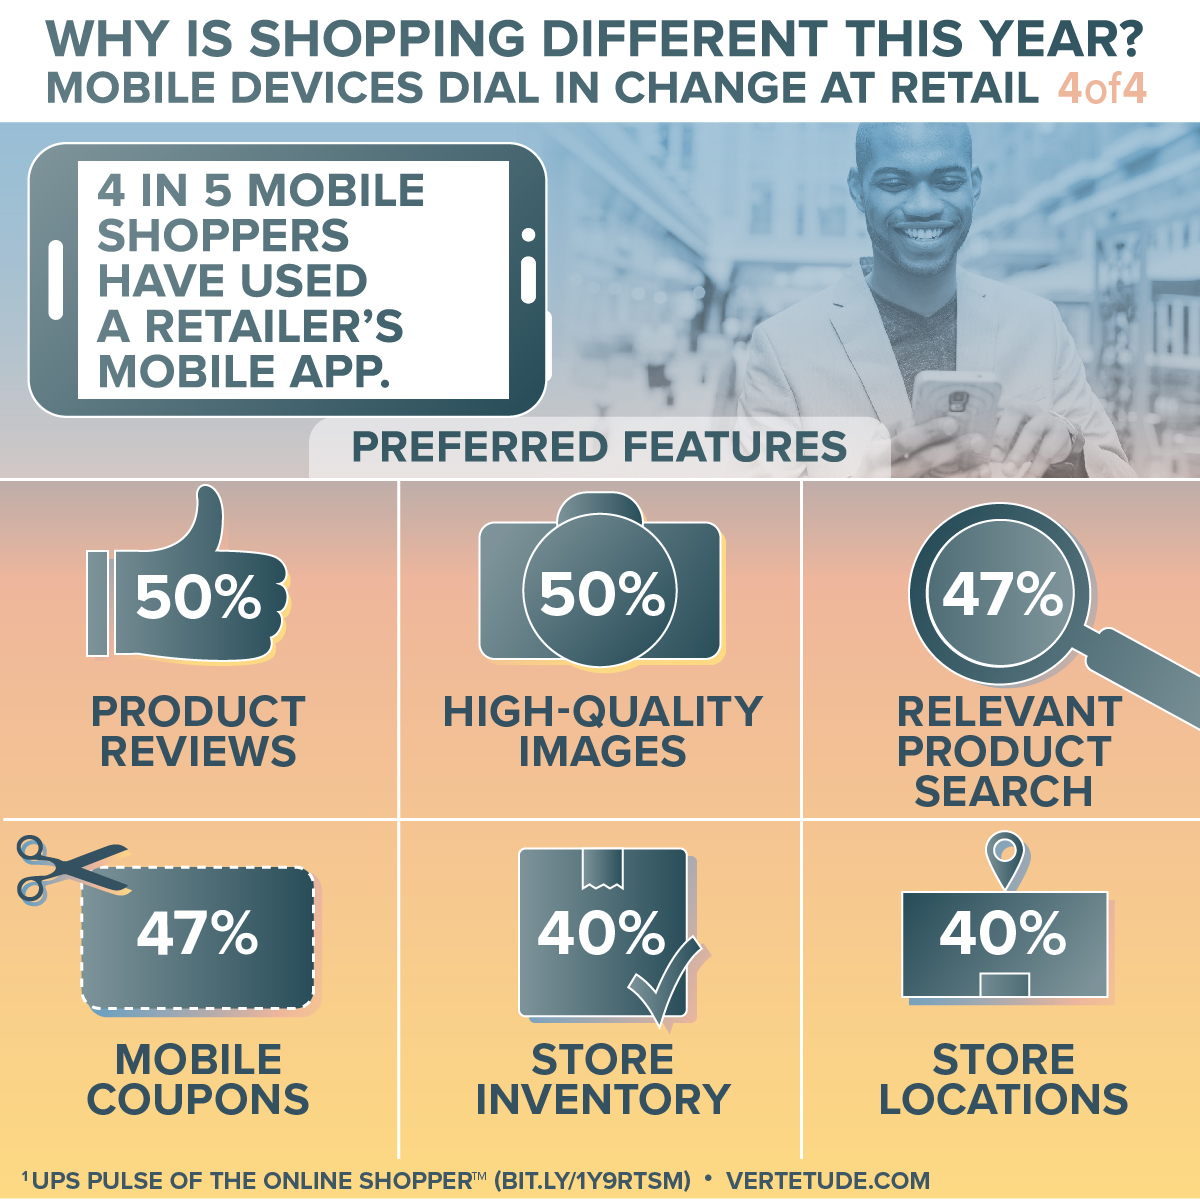 Infographic of mobile devices changing retail, retailer mobile apps